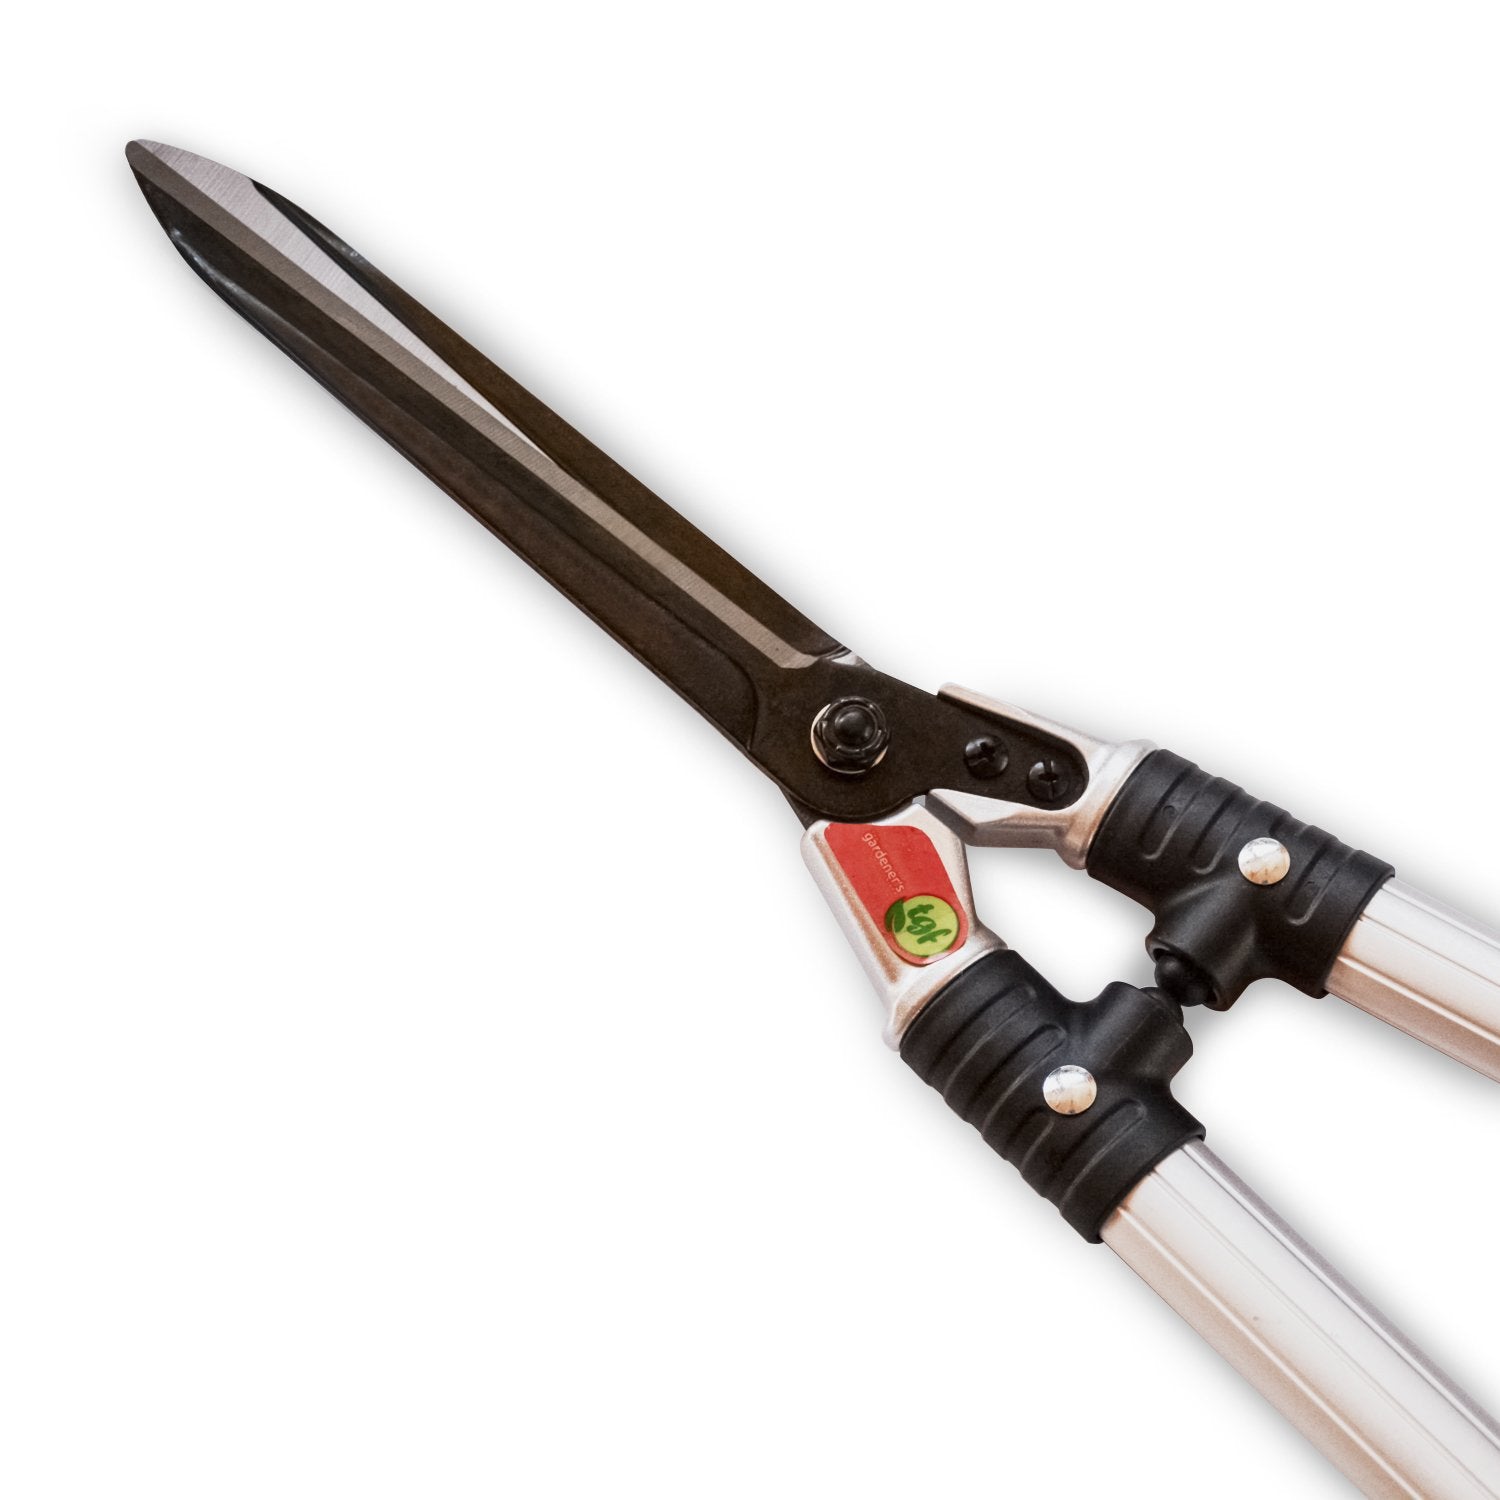 "Pruning shears with blade angled slightly from the handles for easy and comfortable pruning.